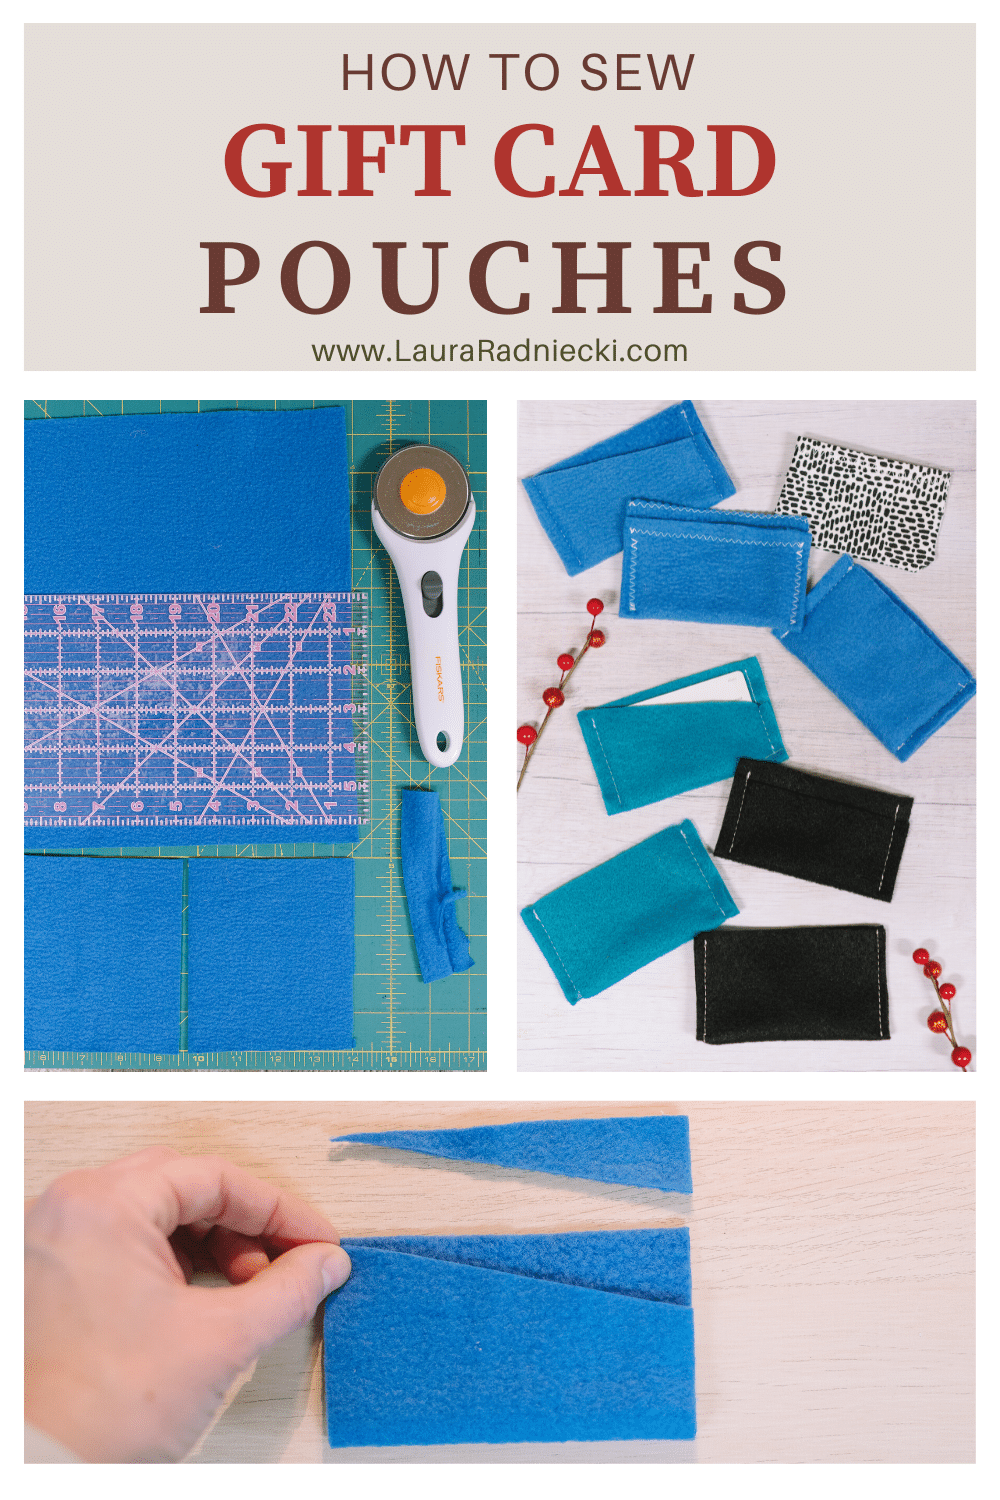 How to Sew Gift Card Pouches